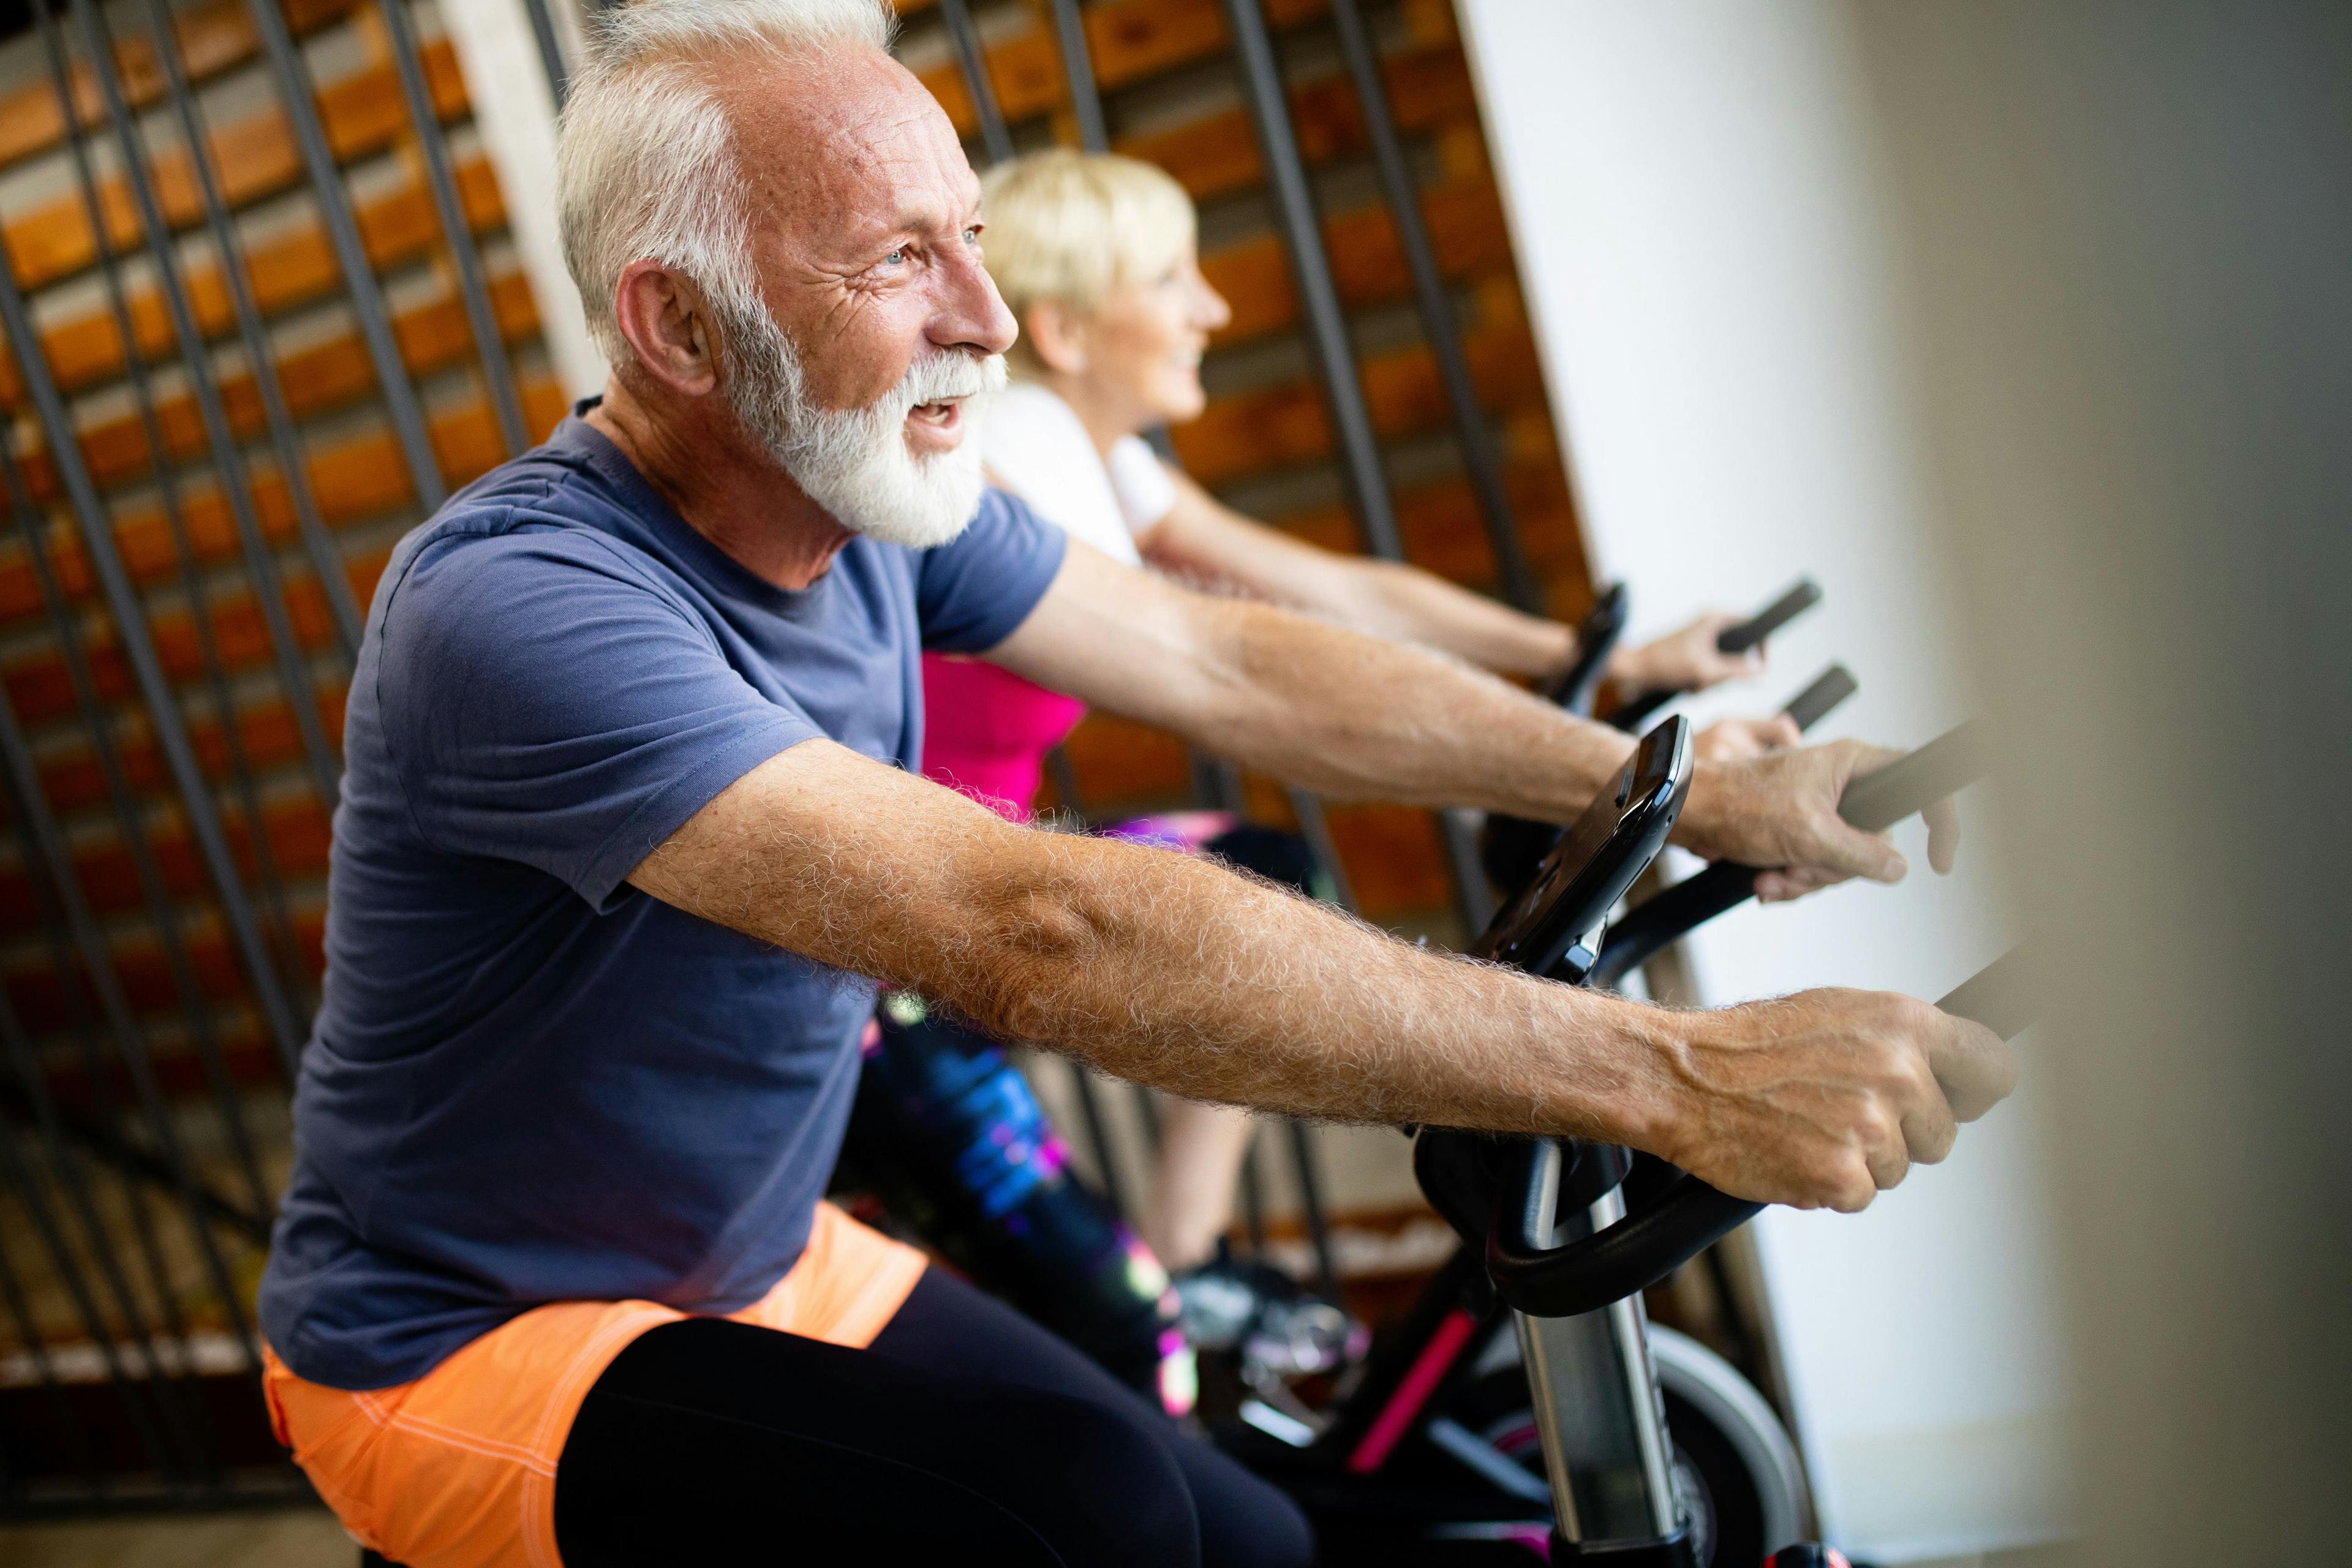 Moderate Physical Activity Could Lower Fracture Risk in Middle-Aged Adults